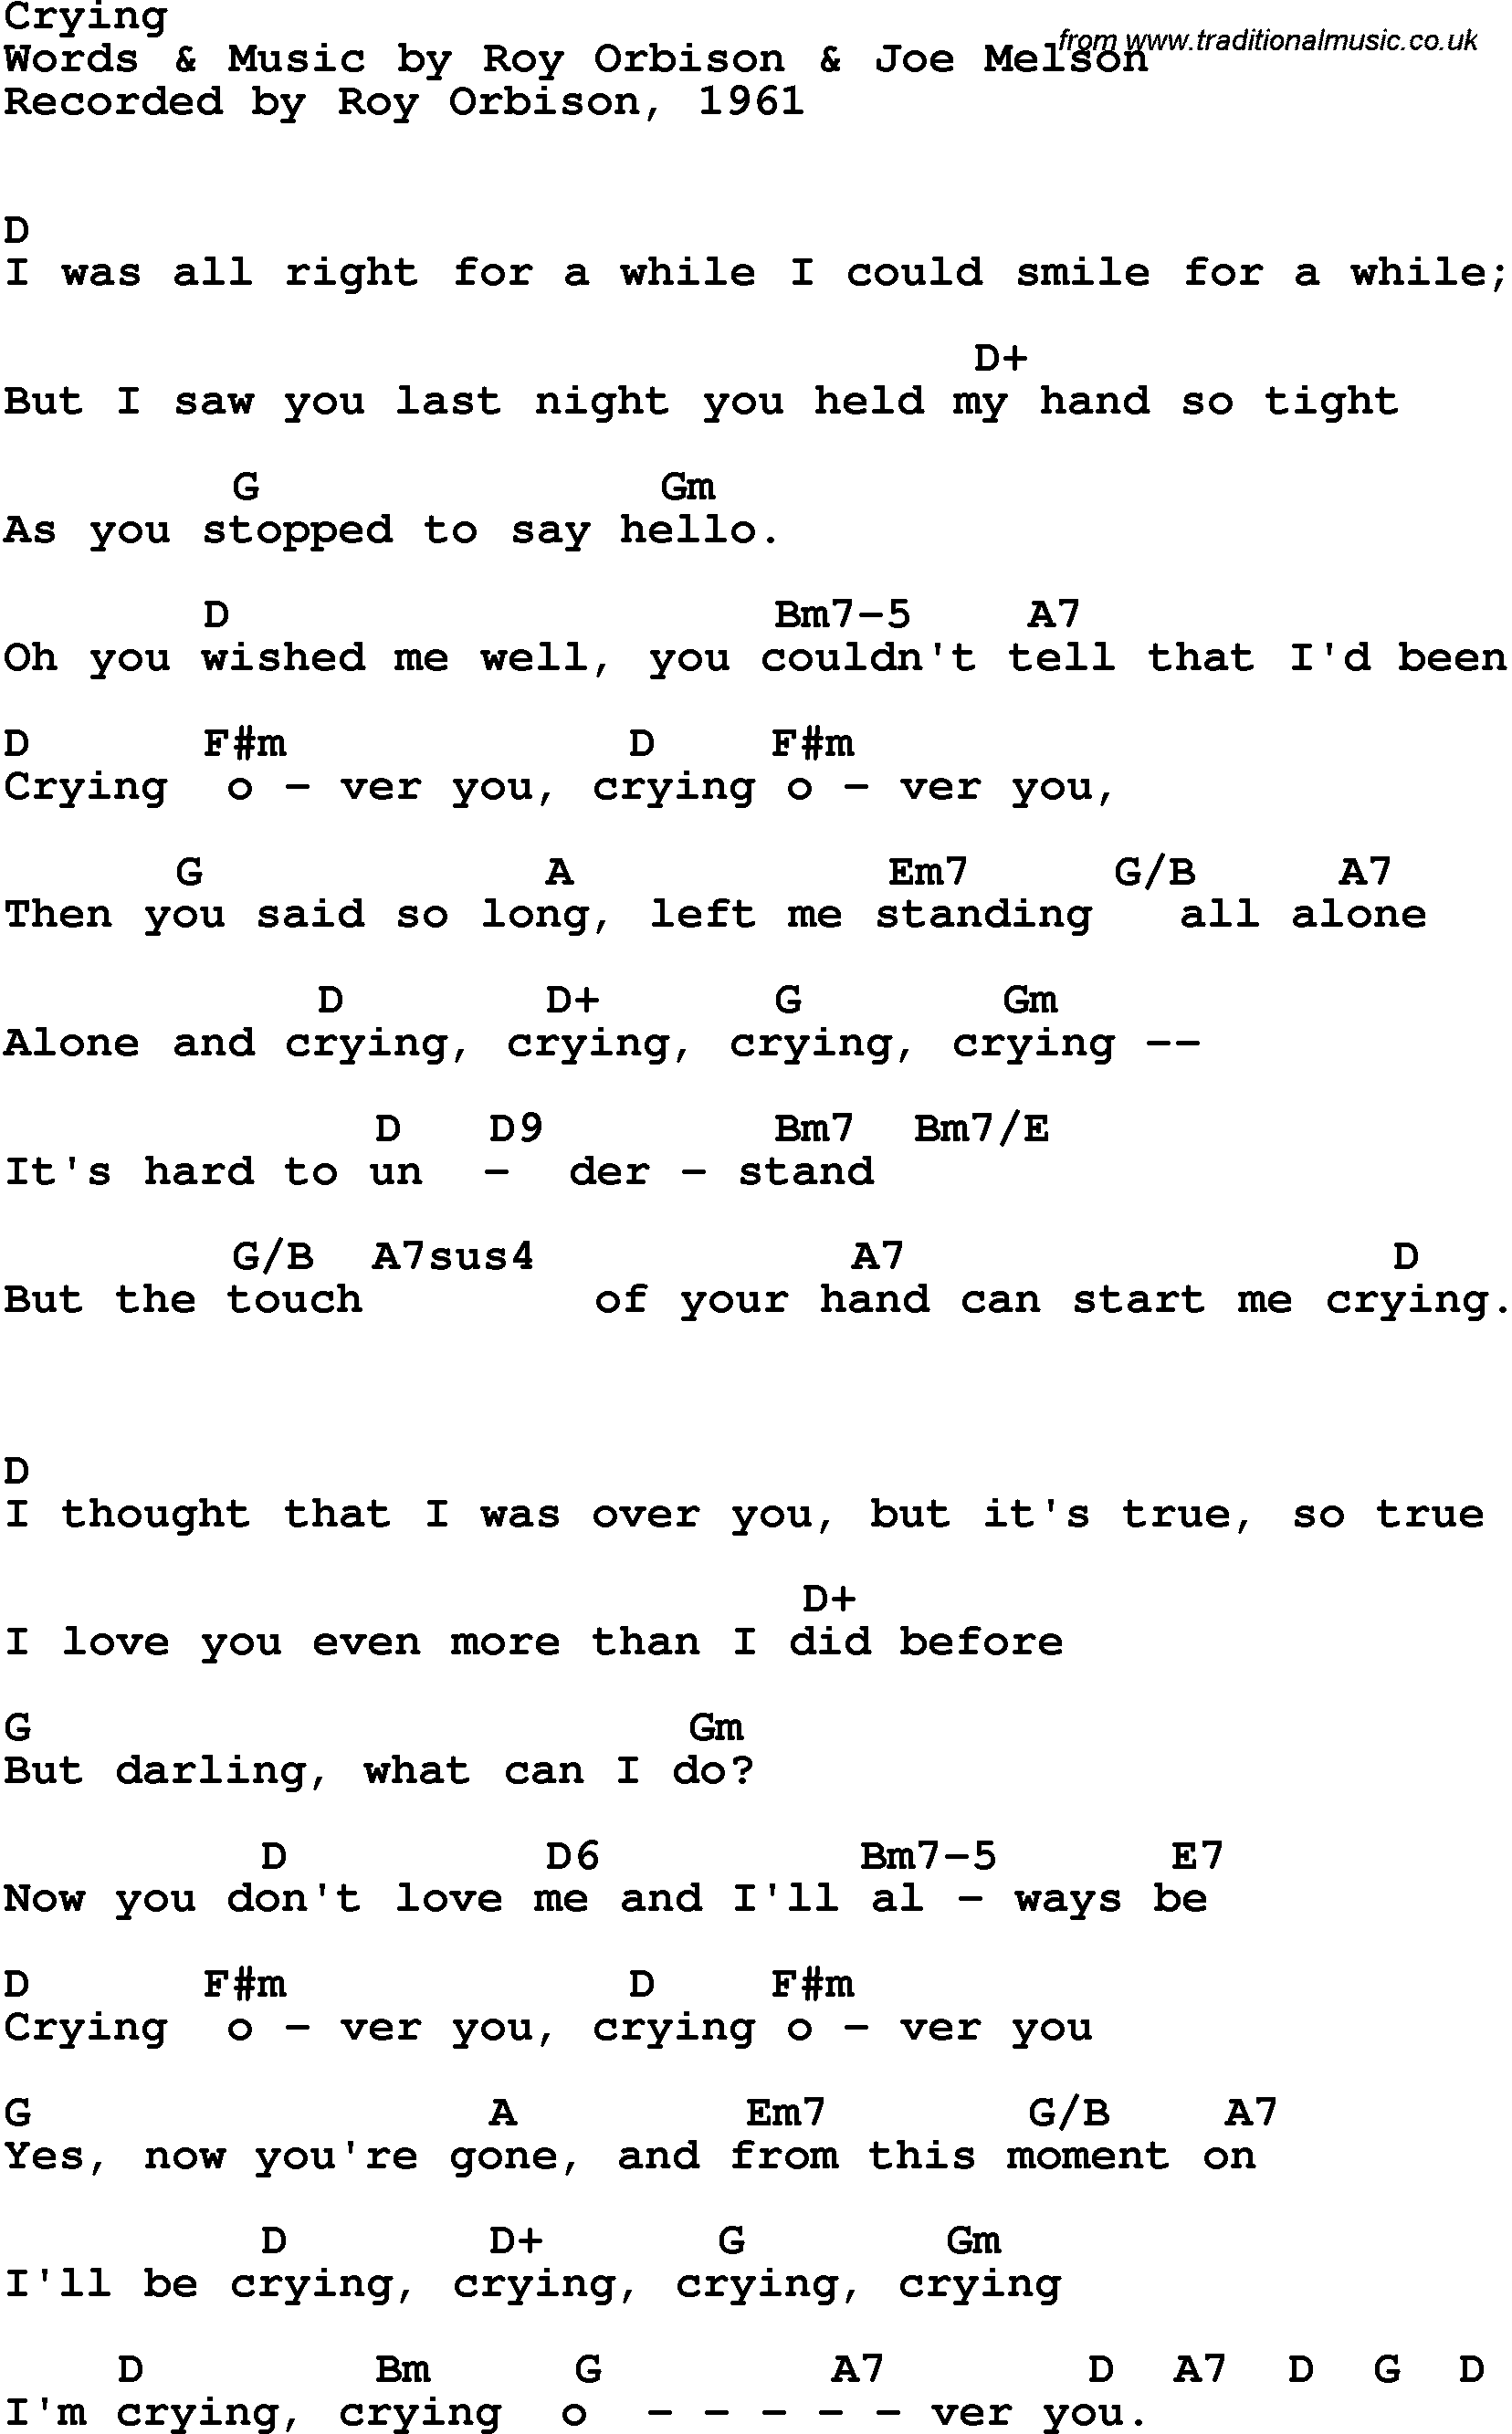 Song Lyrics with guitar chords for Crying - Roy Orbison, 1961